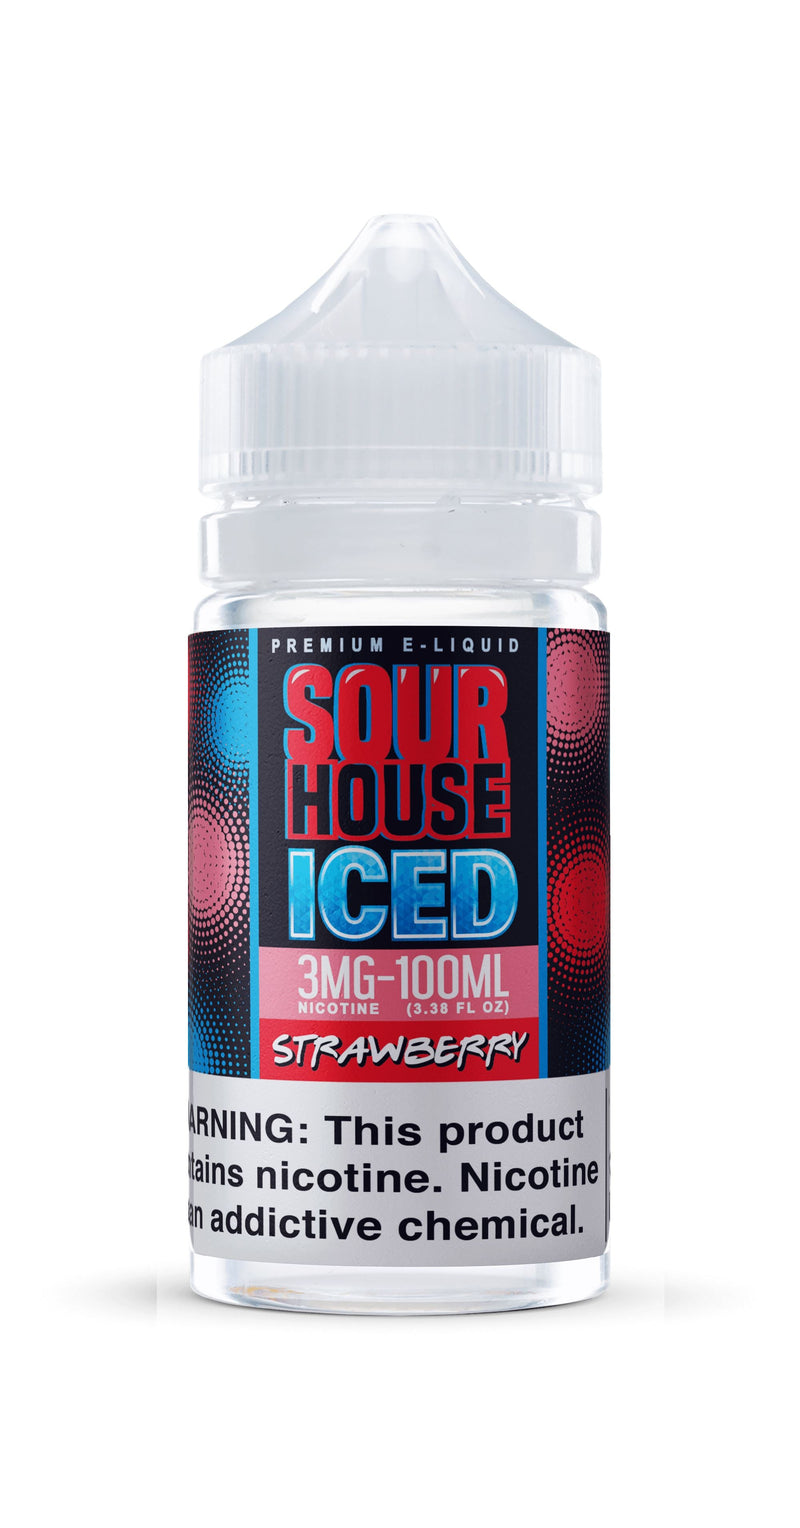 Strawberry by Sour House Iced 100ml bottle